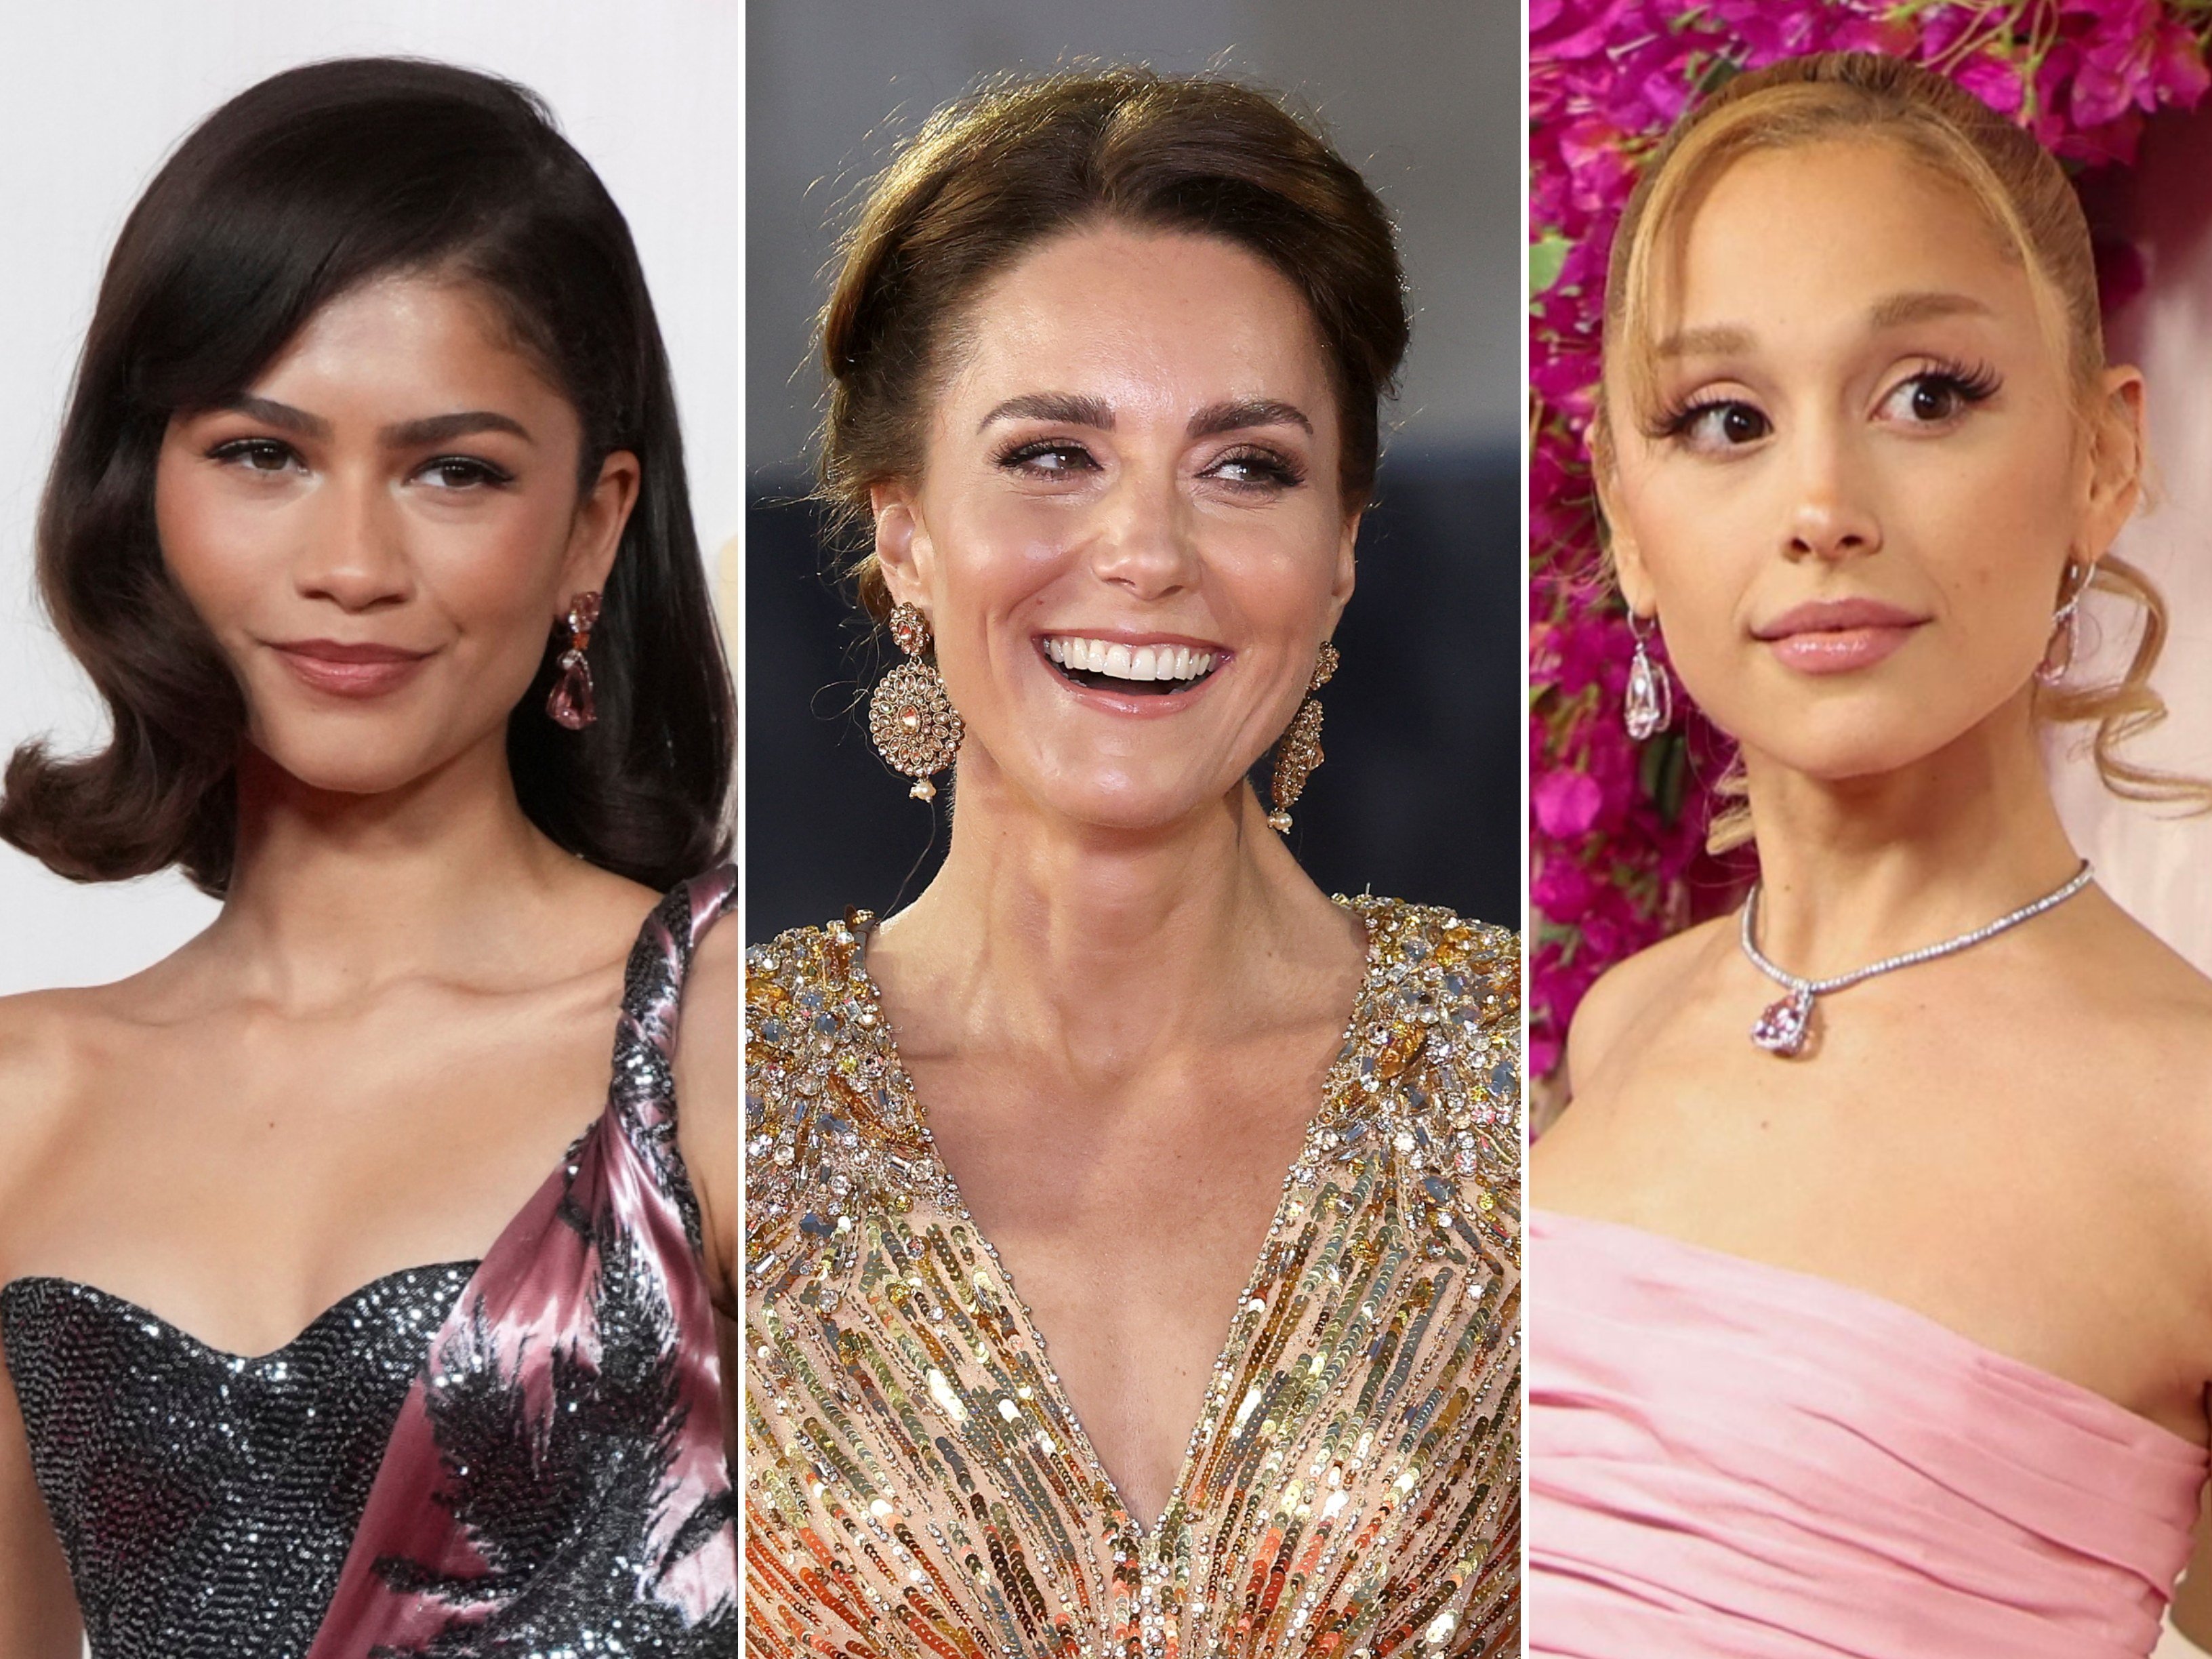 Zendaya, Kate Middleton and Ariana Grande have all been embroiled in controversies regarding edited photos of themselves. Photos: AFP, AP, Getty Images